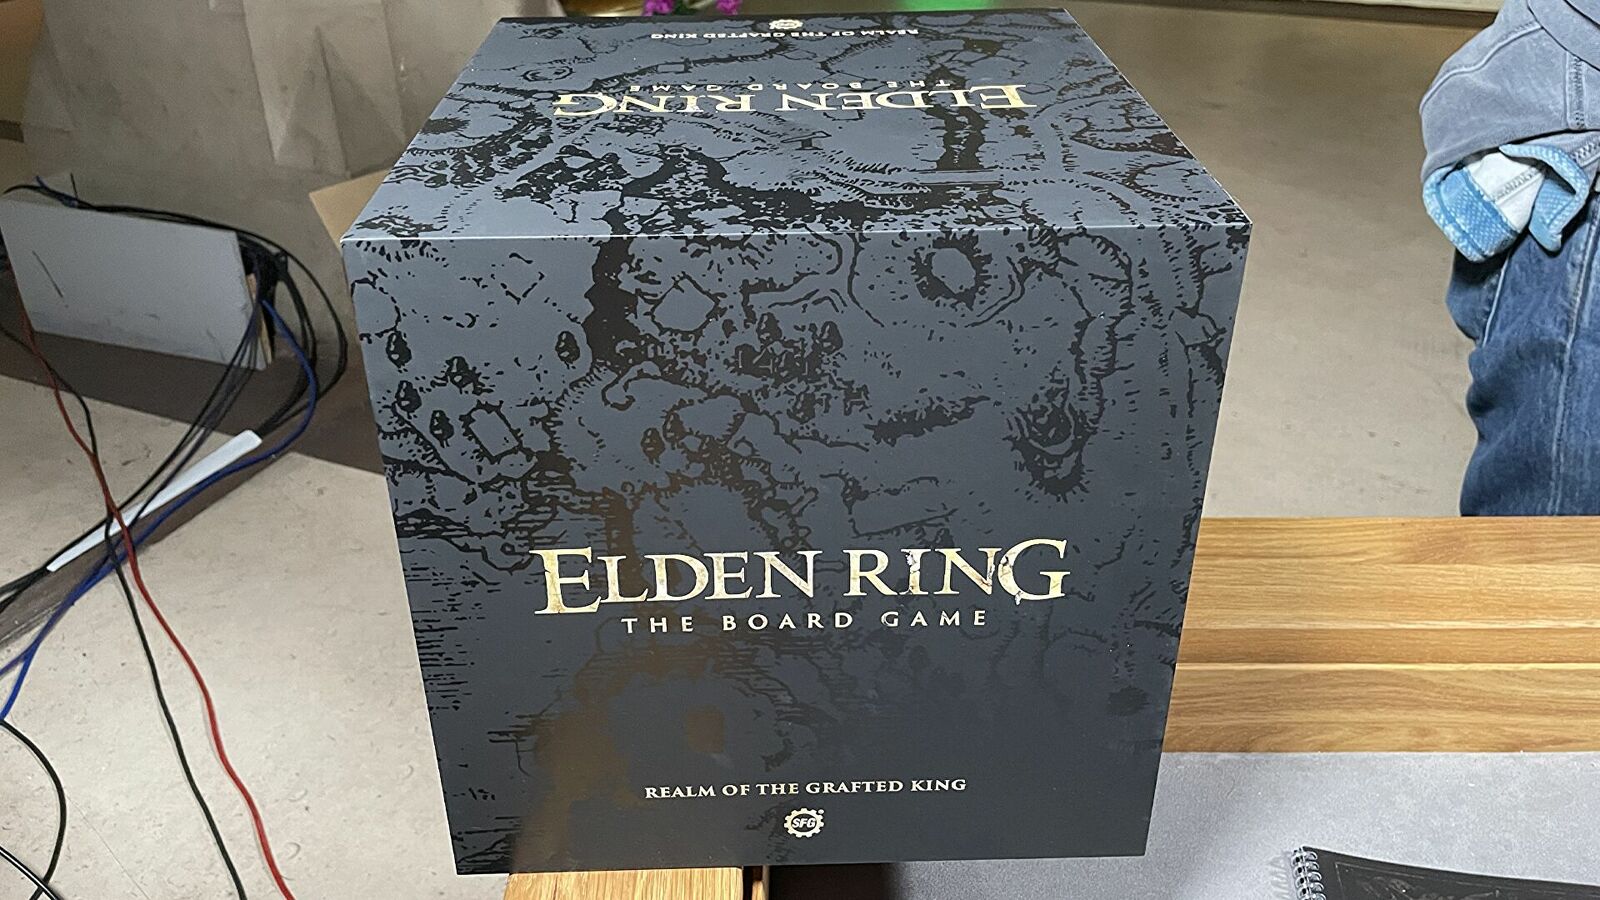 Elden Ring: The Board Game isn't an exact replica of the video game - and that's a good thing